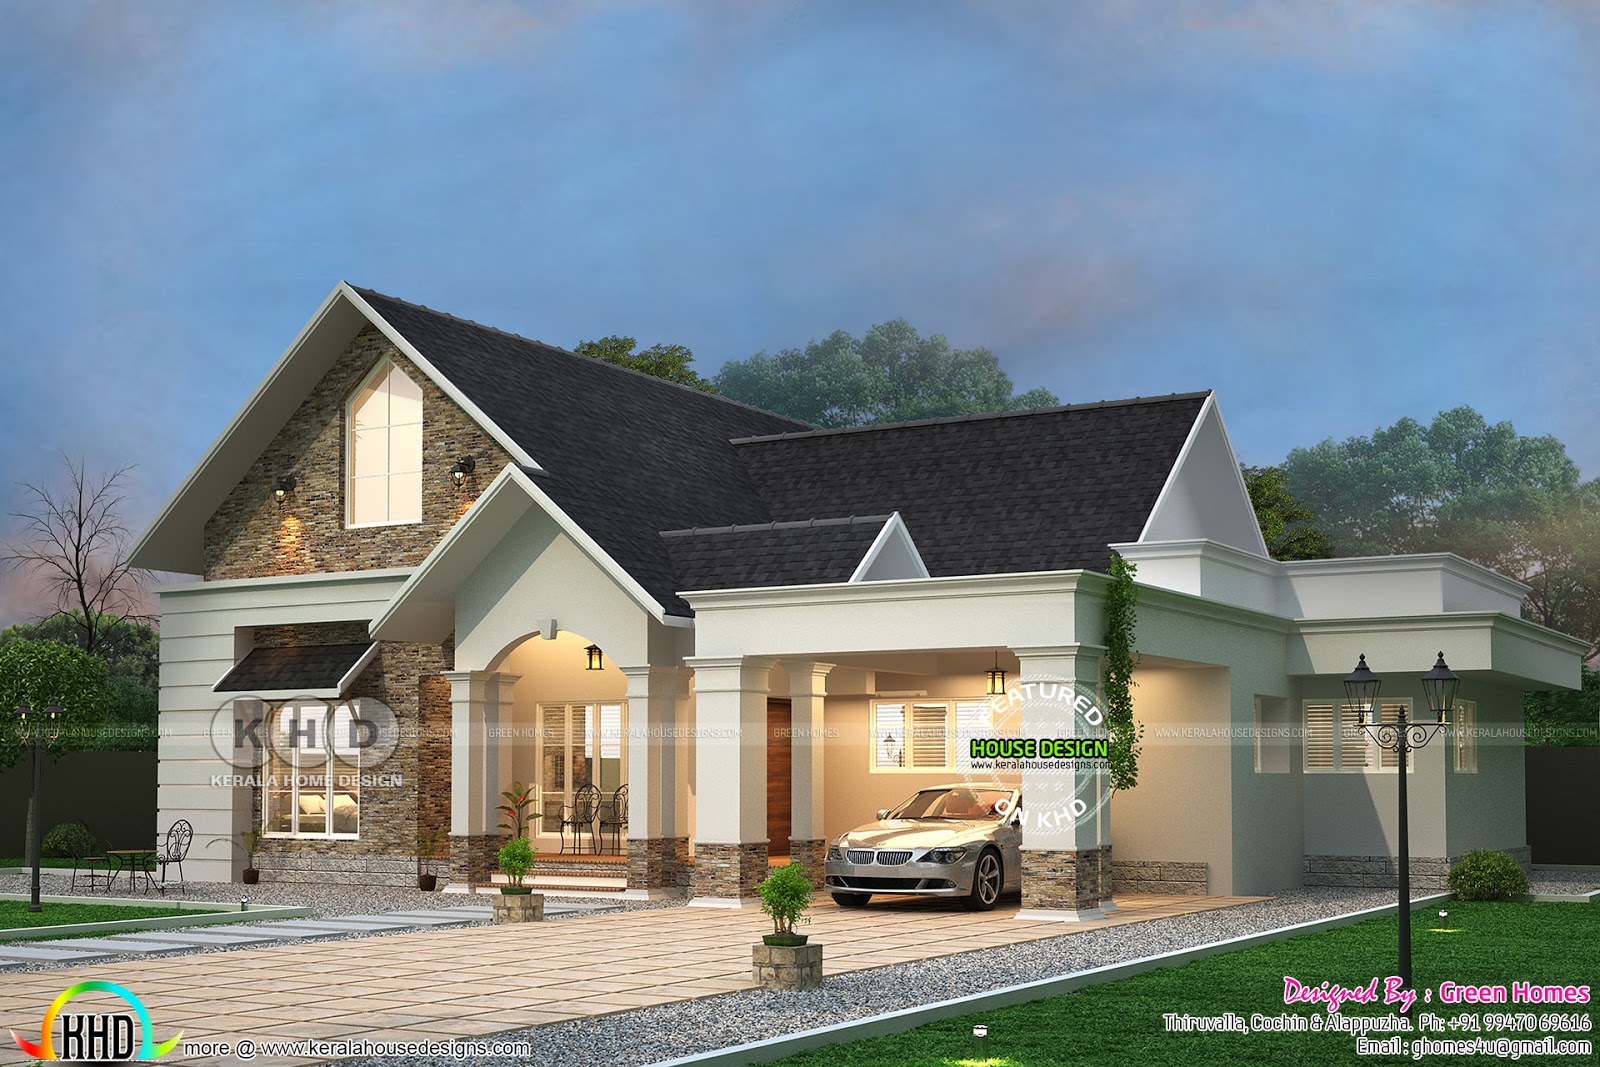 3 Bedroom sloped roof bungalow architecture - Kerala home design ...